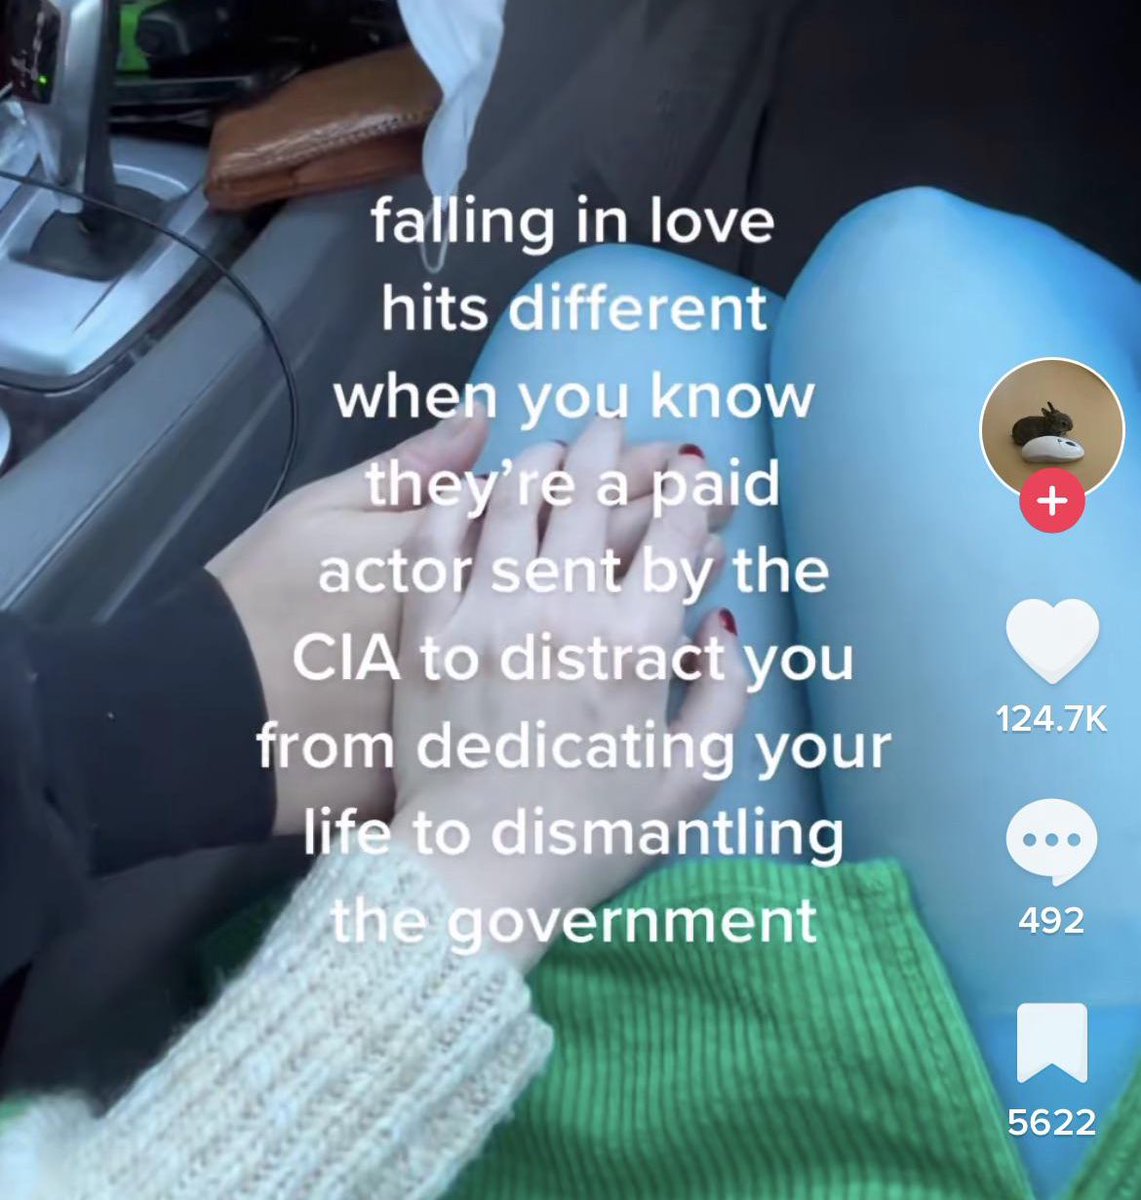 TikTok screenshots - photo caption - falling in love hits different when you know they're a paid actor sent by the Cia to distract you from dedicating your life to dismantling the government Cate 492 5622